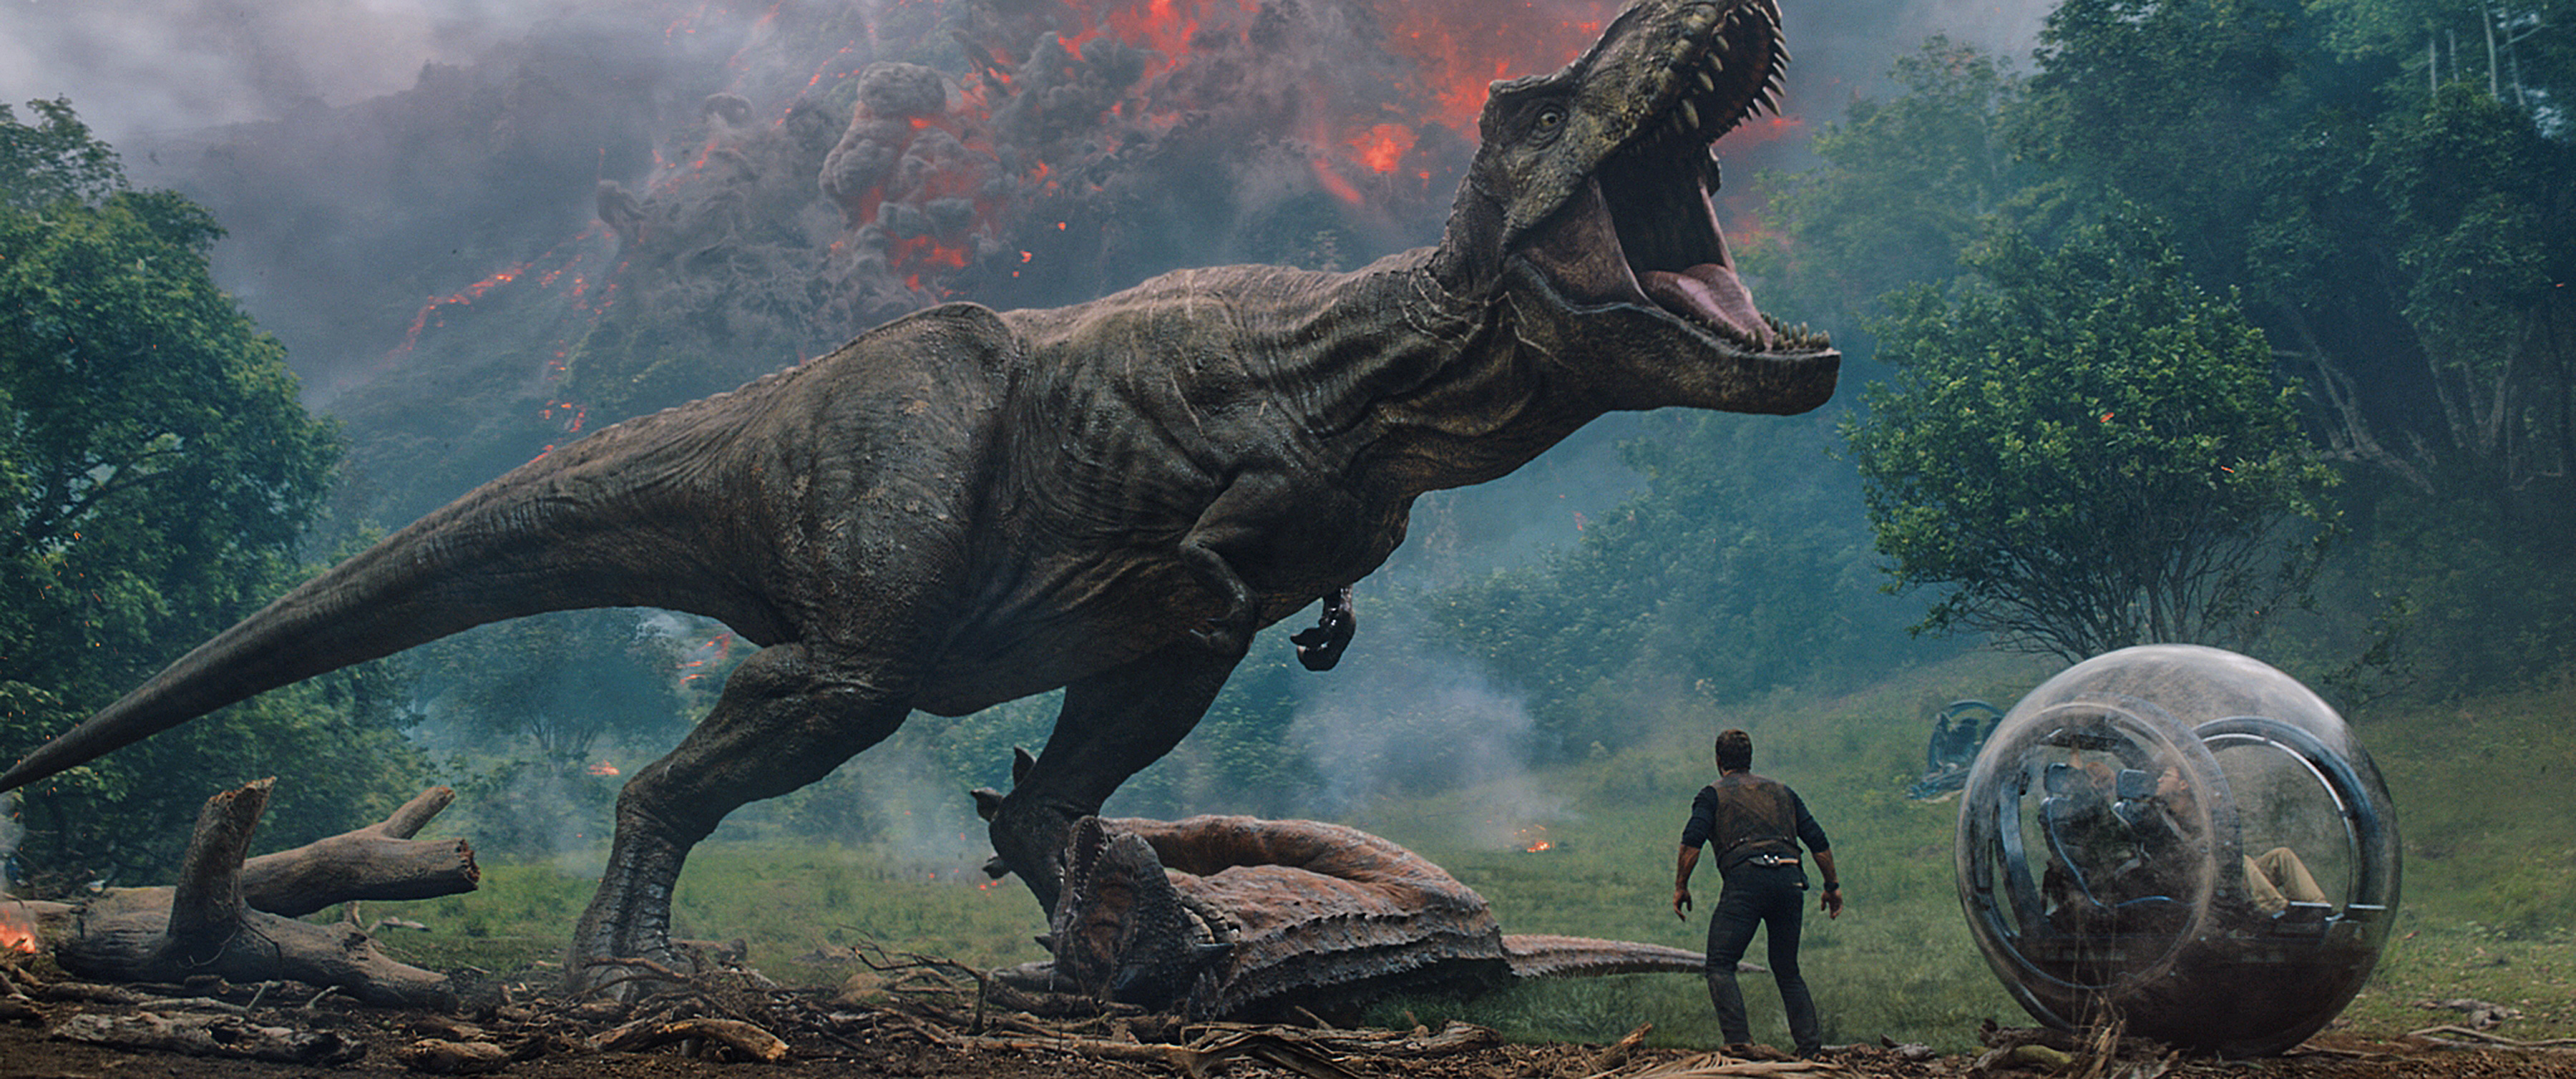 New image from Jurassic World: Dominion revealed